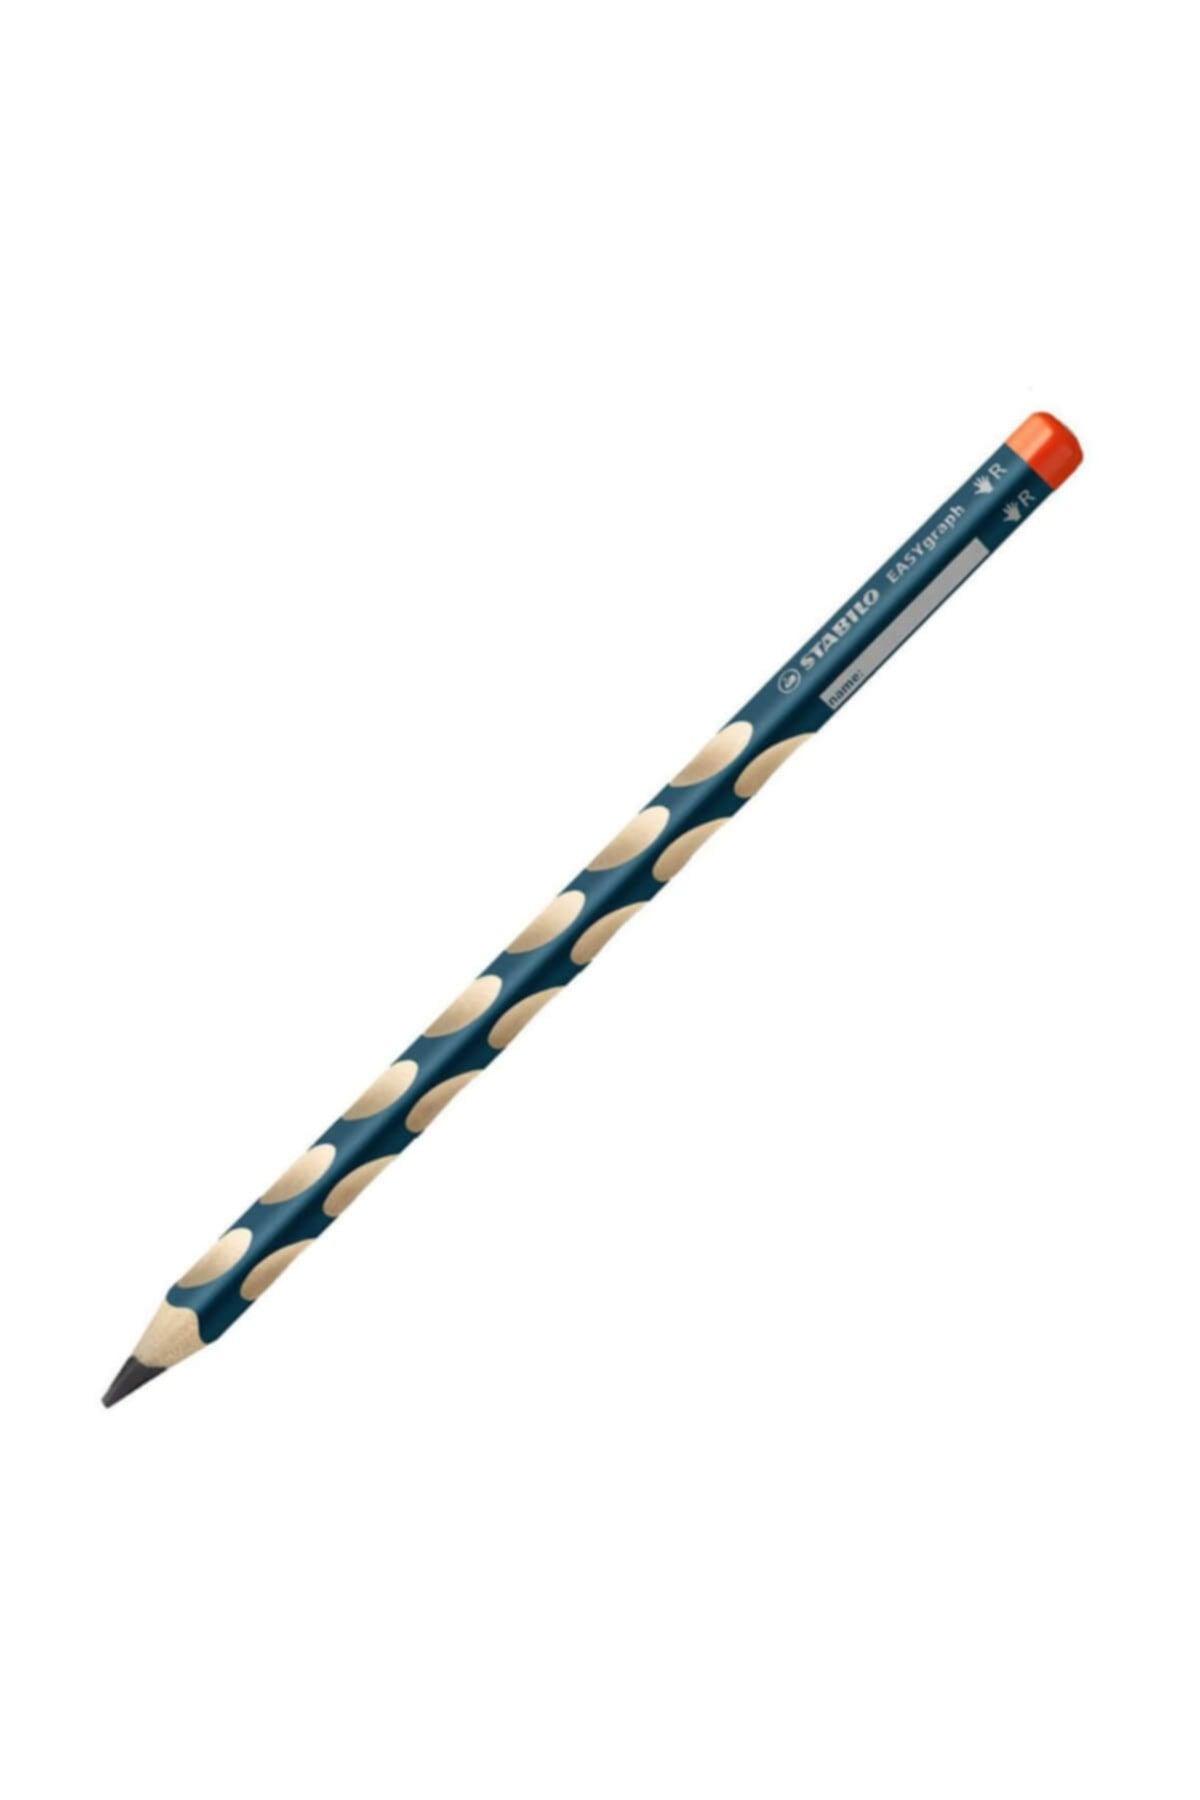 Easygraph Pencil - Right Hand